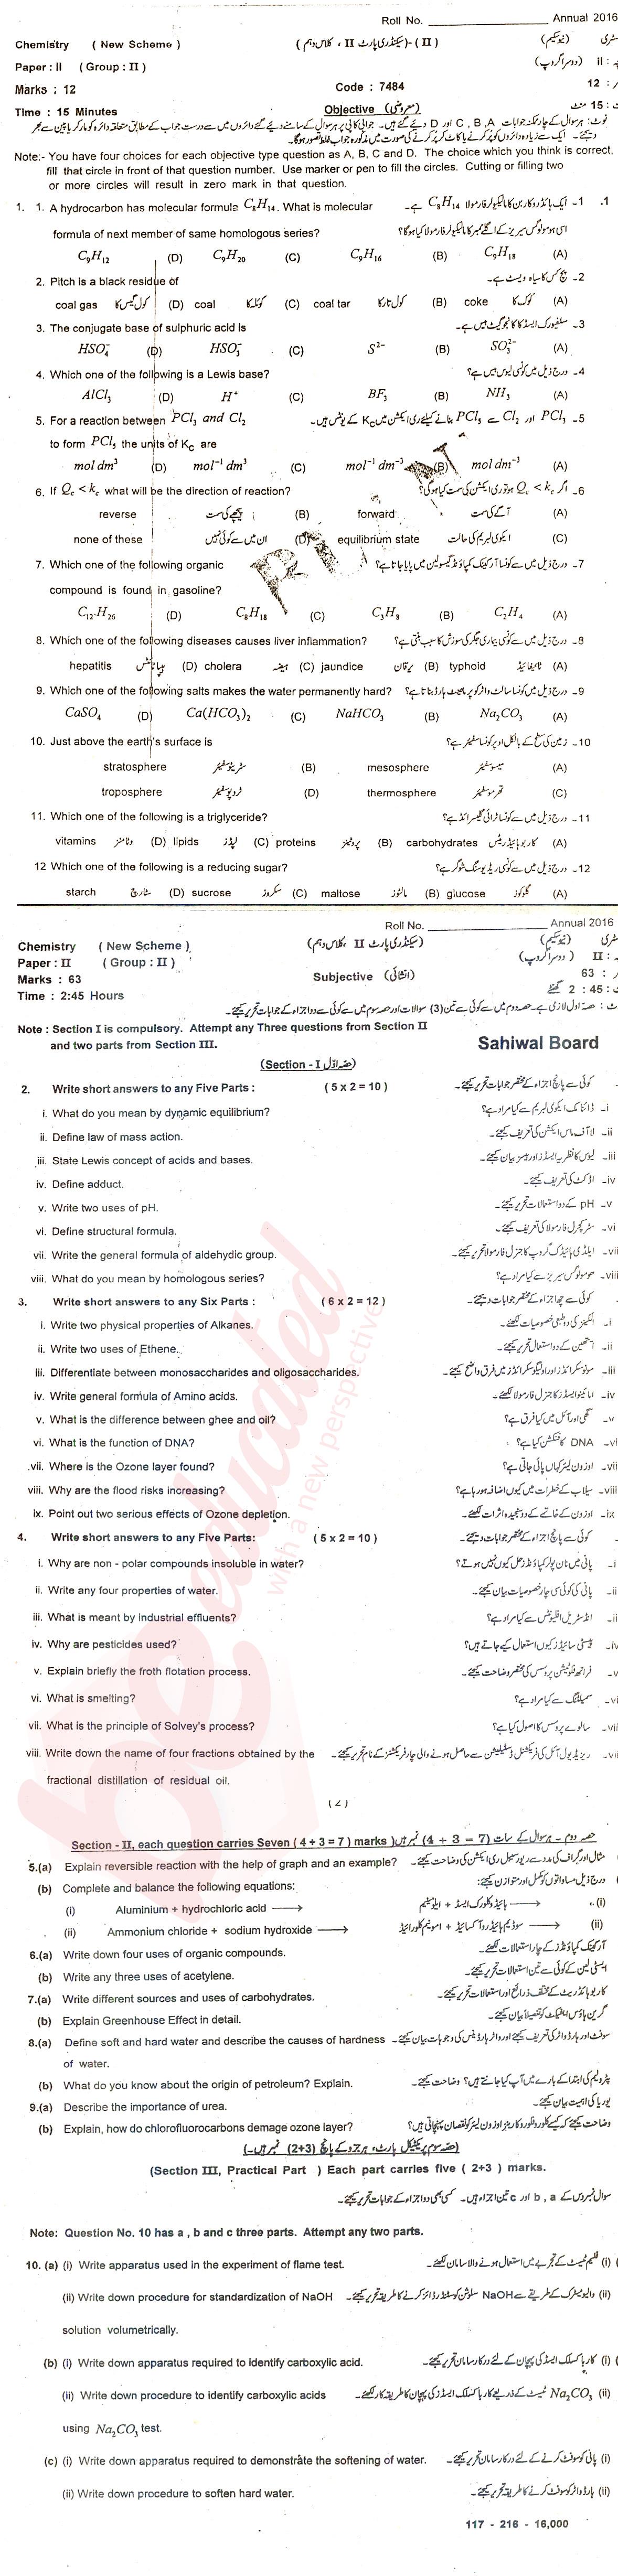 Chemistry 10th class Past Paper Group 2 BISE Sahiwal 2016